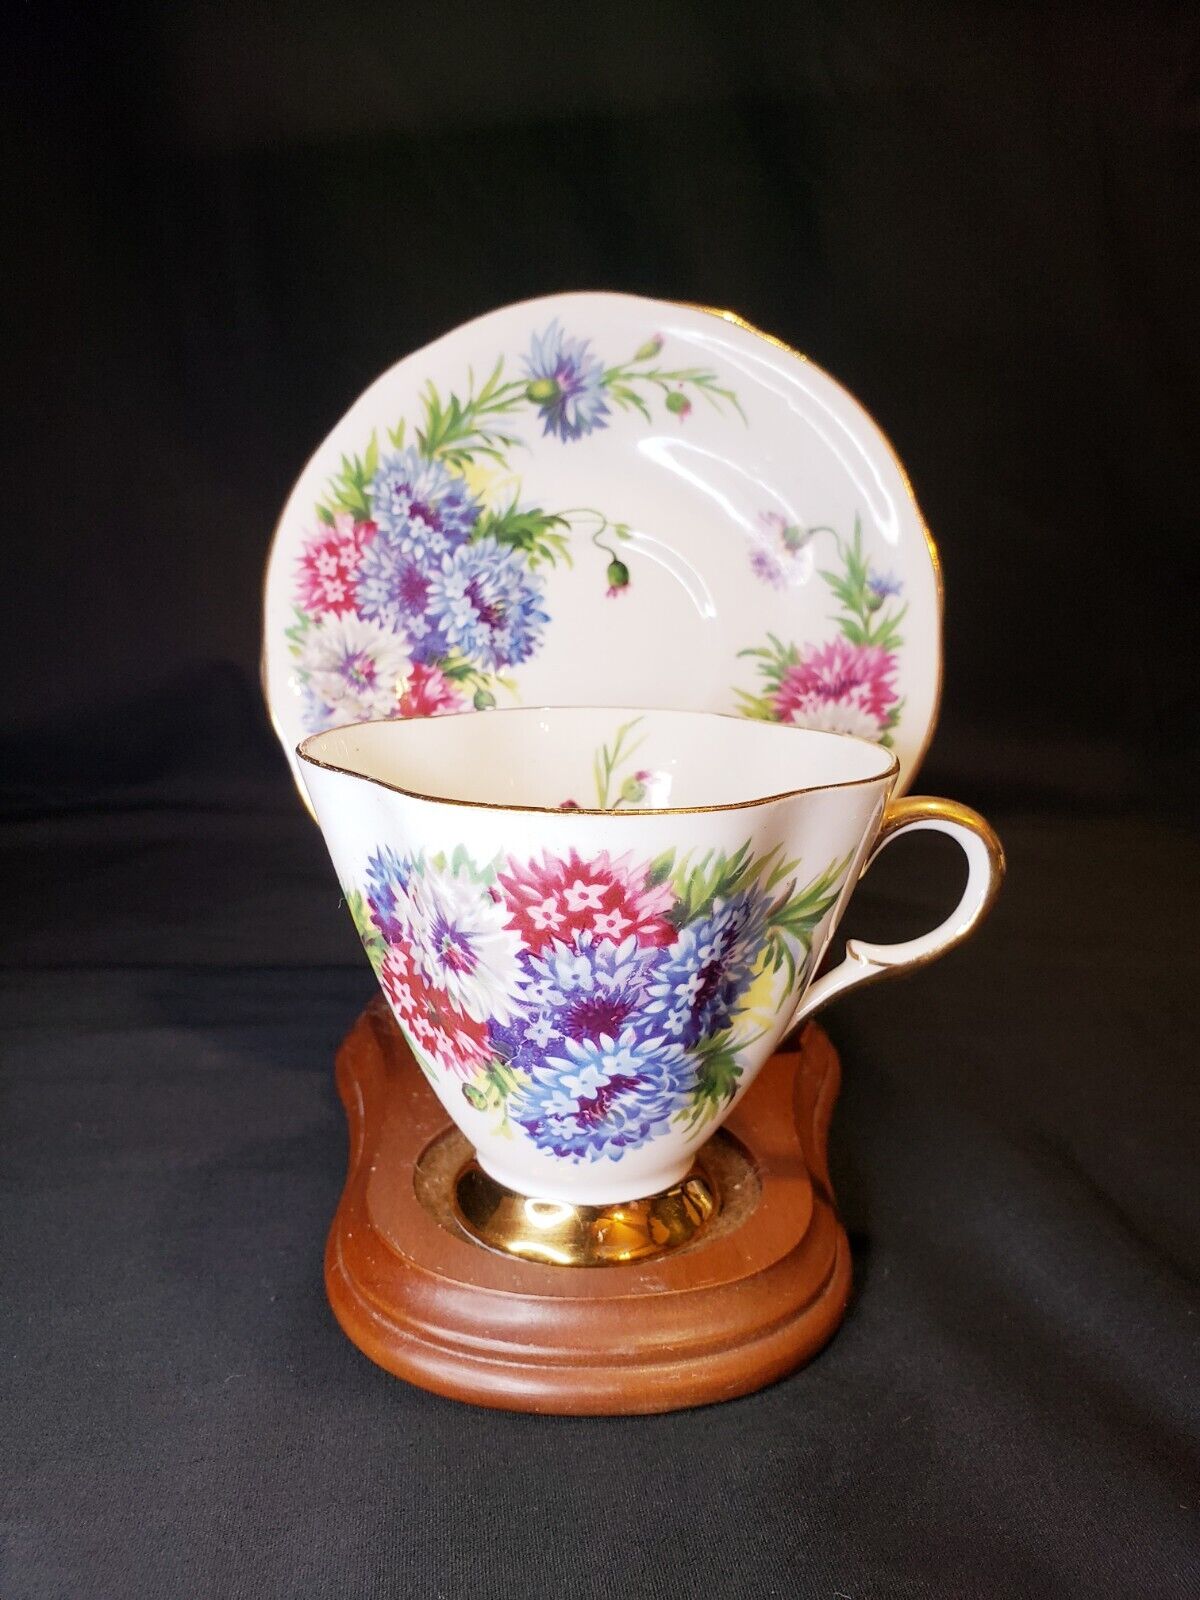 Vtg Clarence English Bone China Teacup Saucer Harvest Glory Floral Footed Gilded